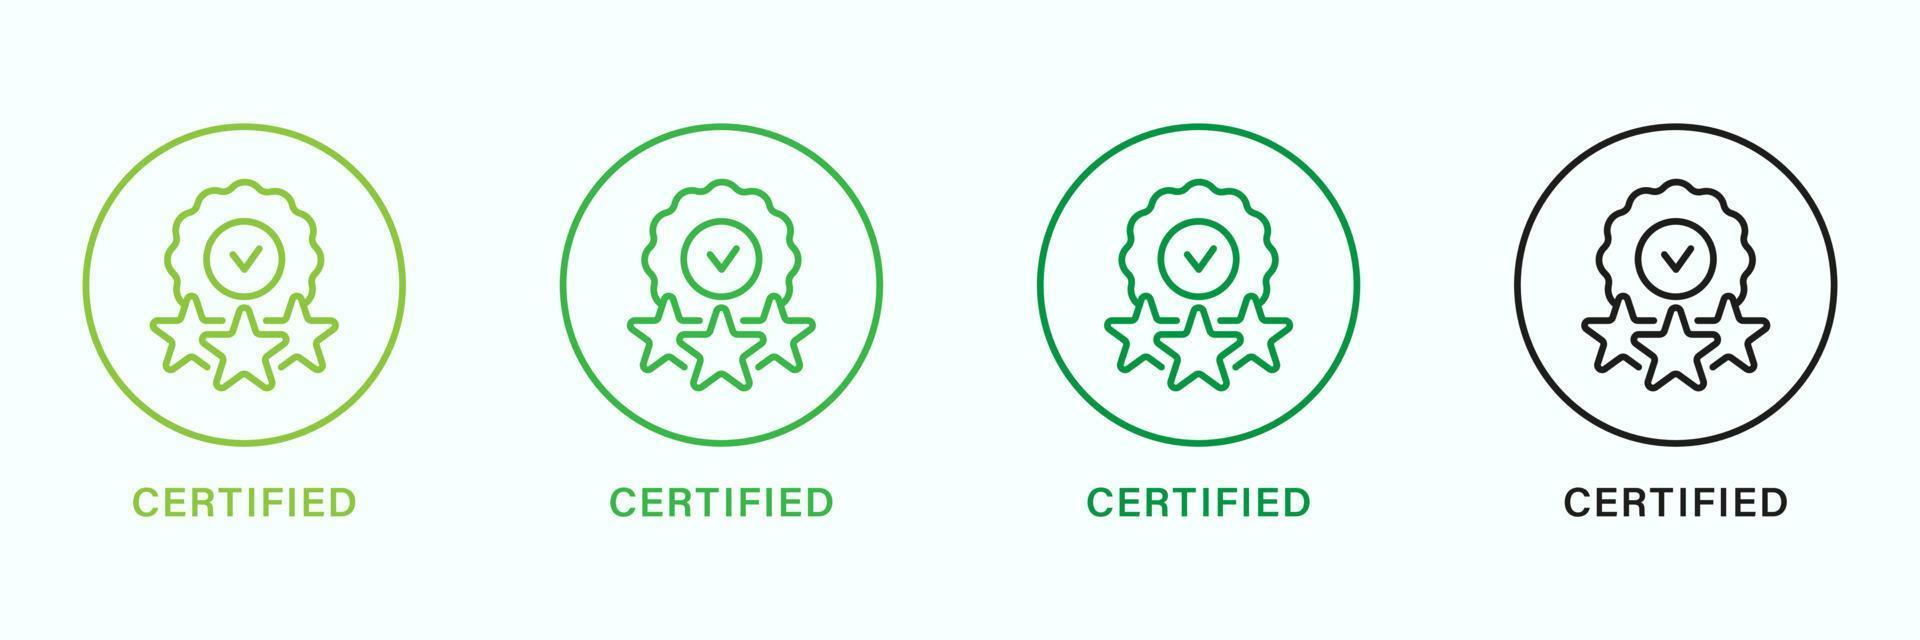 Certified Product Quality Line Green and Black Icon Set. Certificate Guarantee Outline Pictogram. Accredited Product Stamp with Stars. Control Symbol, Verified Seal. Isolated Vector Illustration.